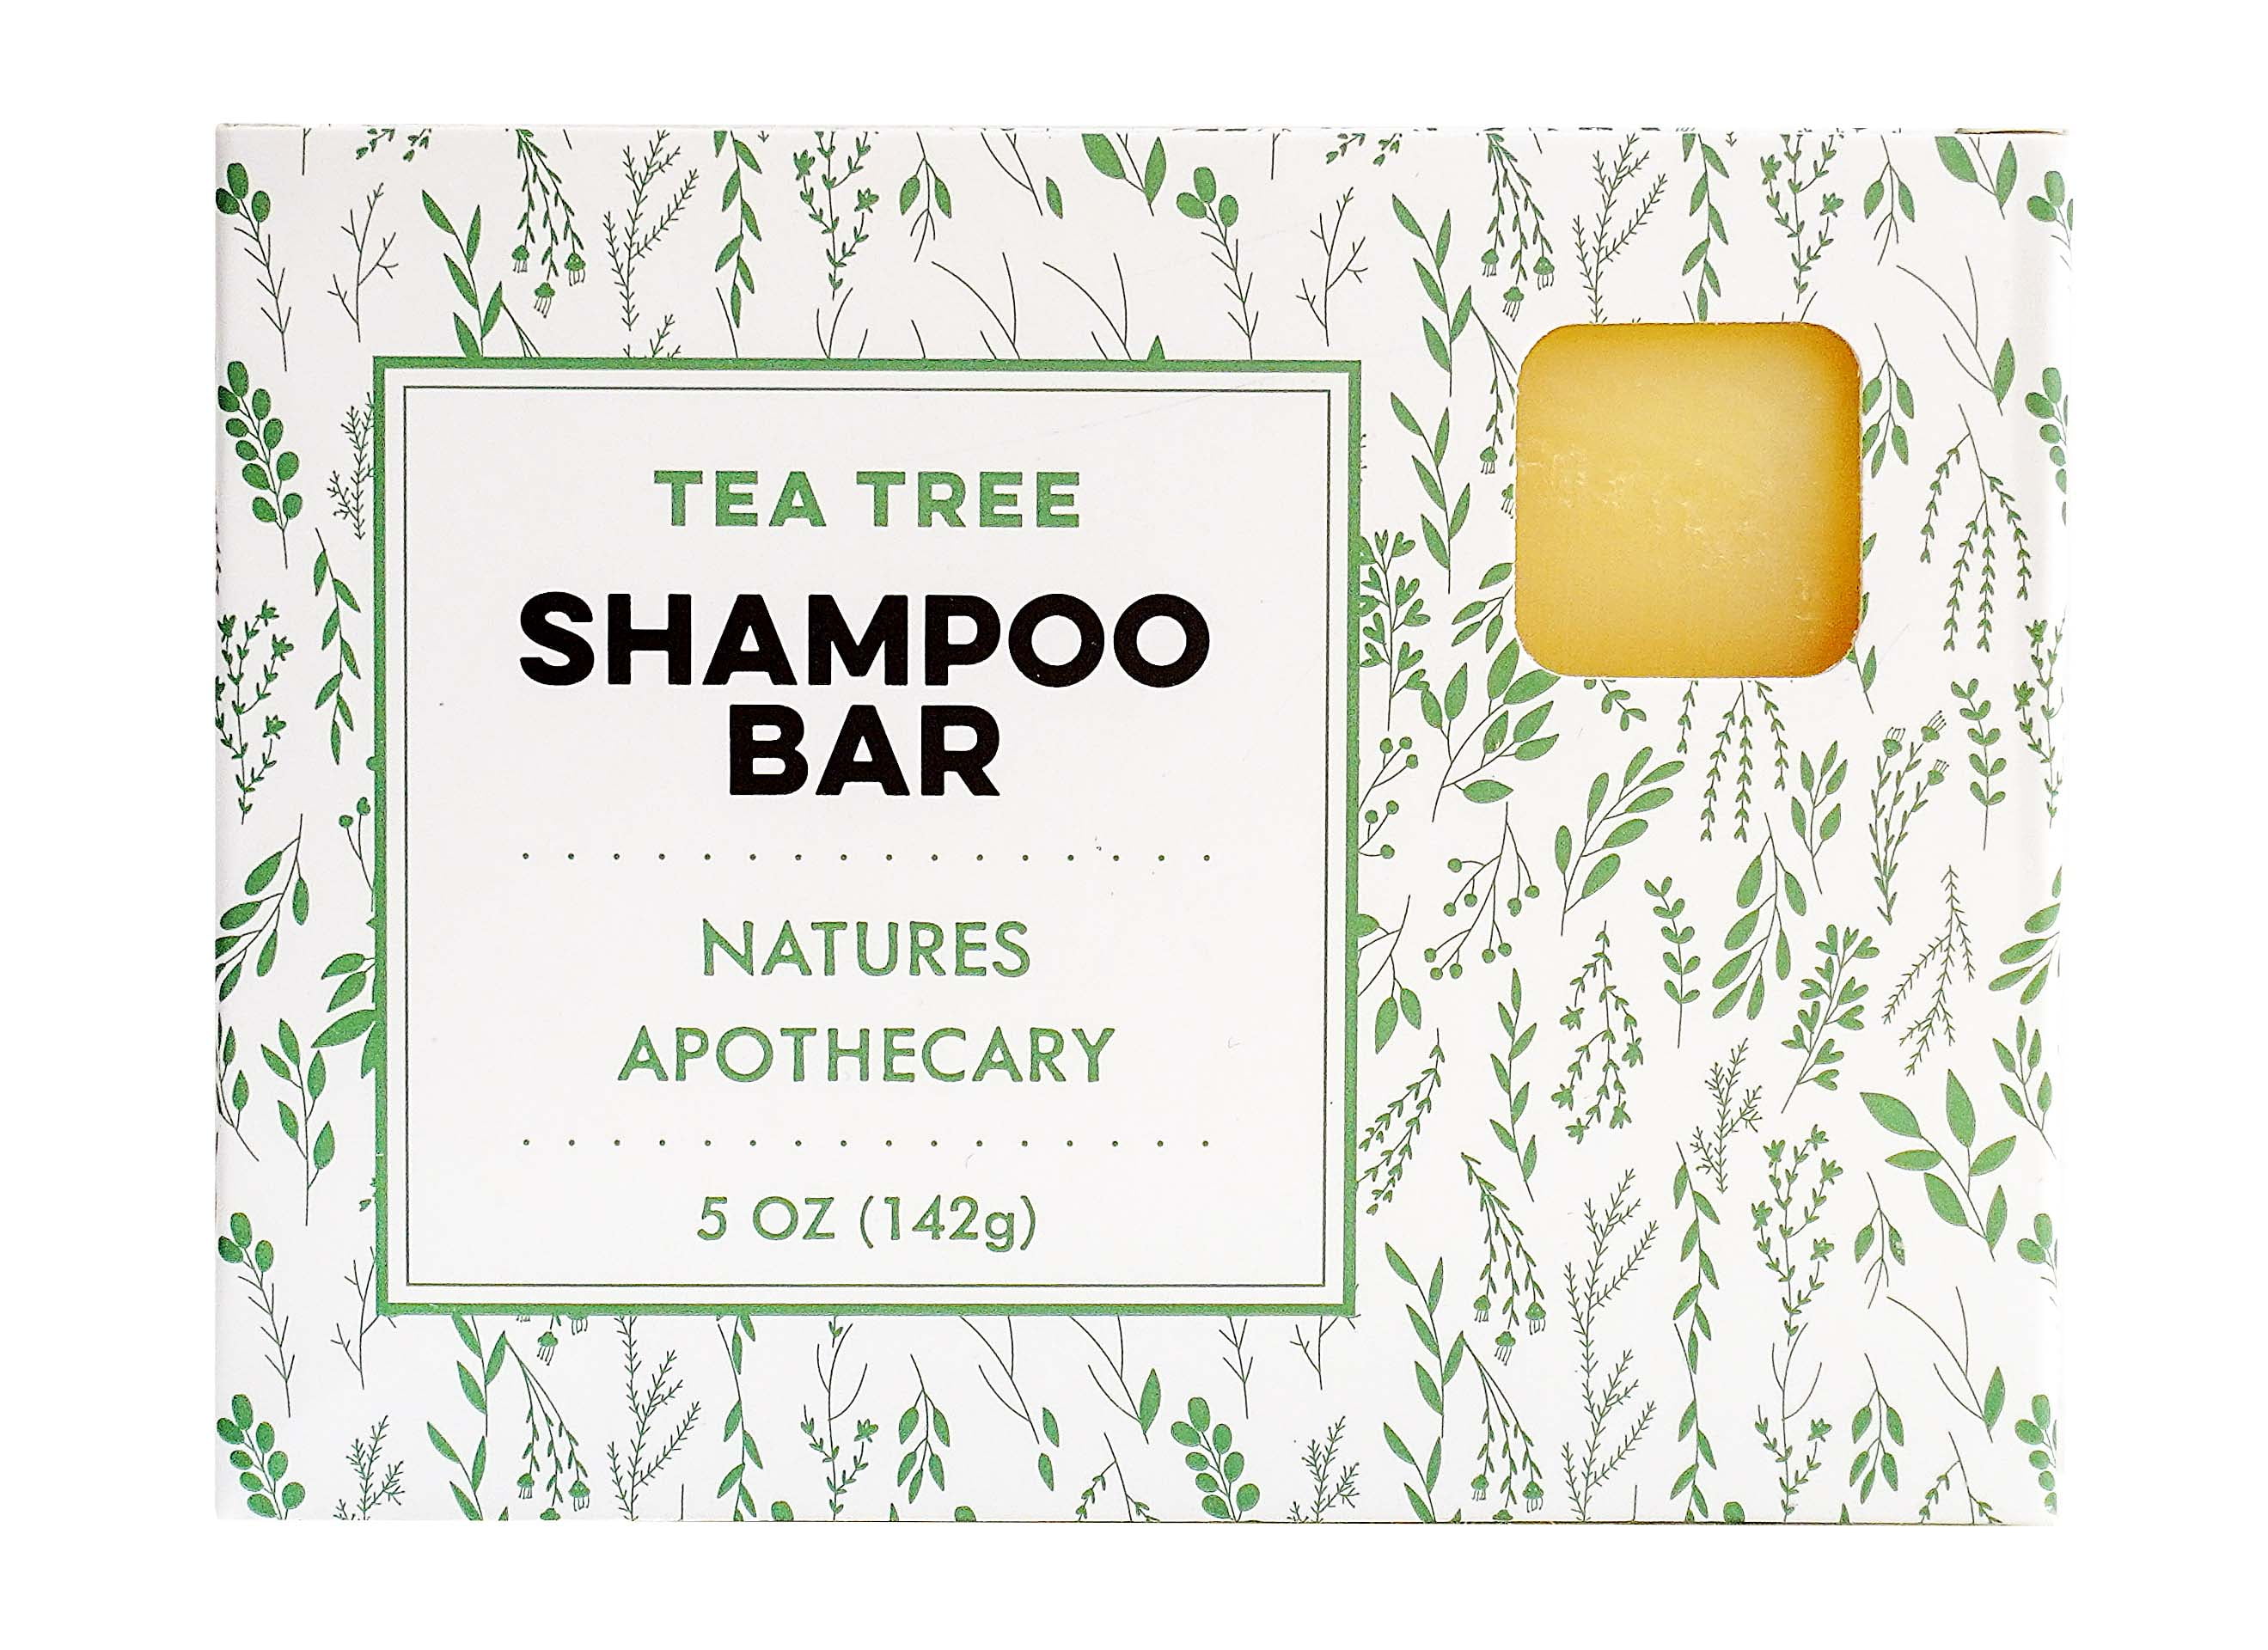 Nature's Apothecary Shampoo Bar - 5 oz. Natural Tree Shampoo with Safflower & Essential Oils | Plastic Free & Hypoallergenic for All Hair Types - Walmart.com